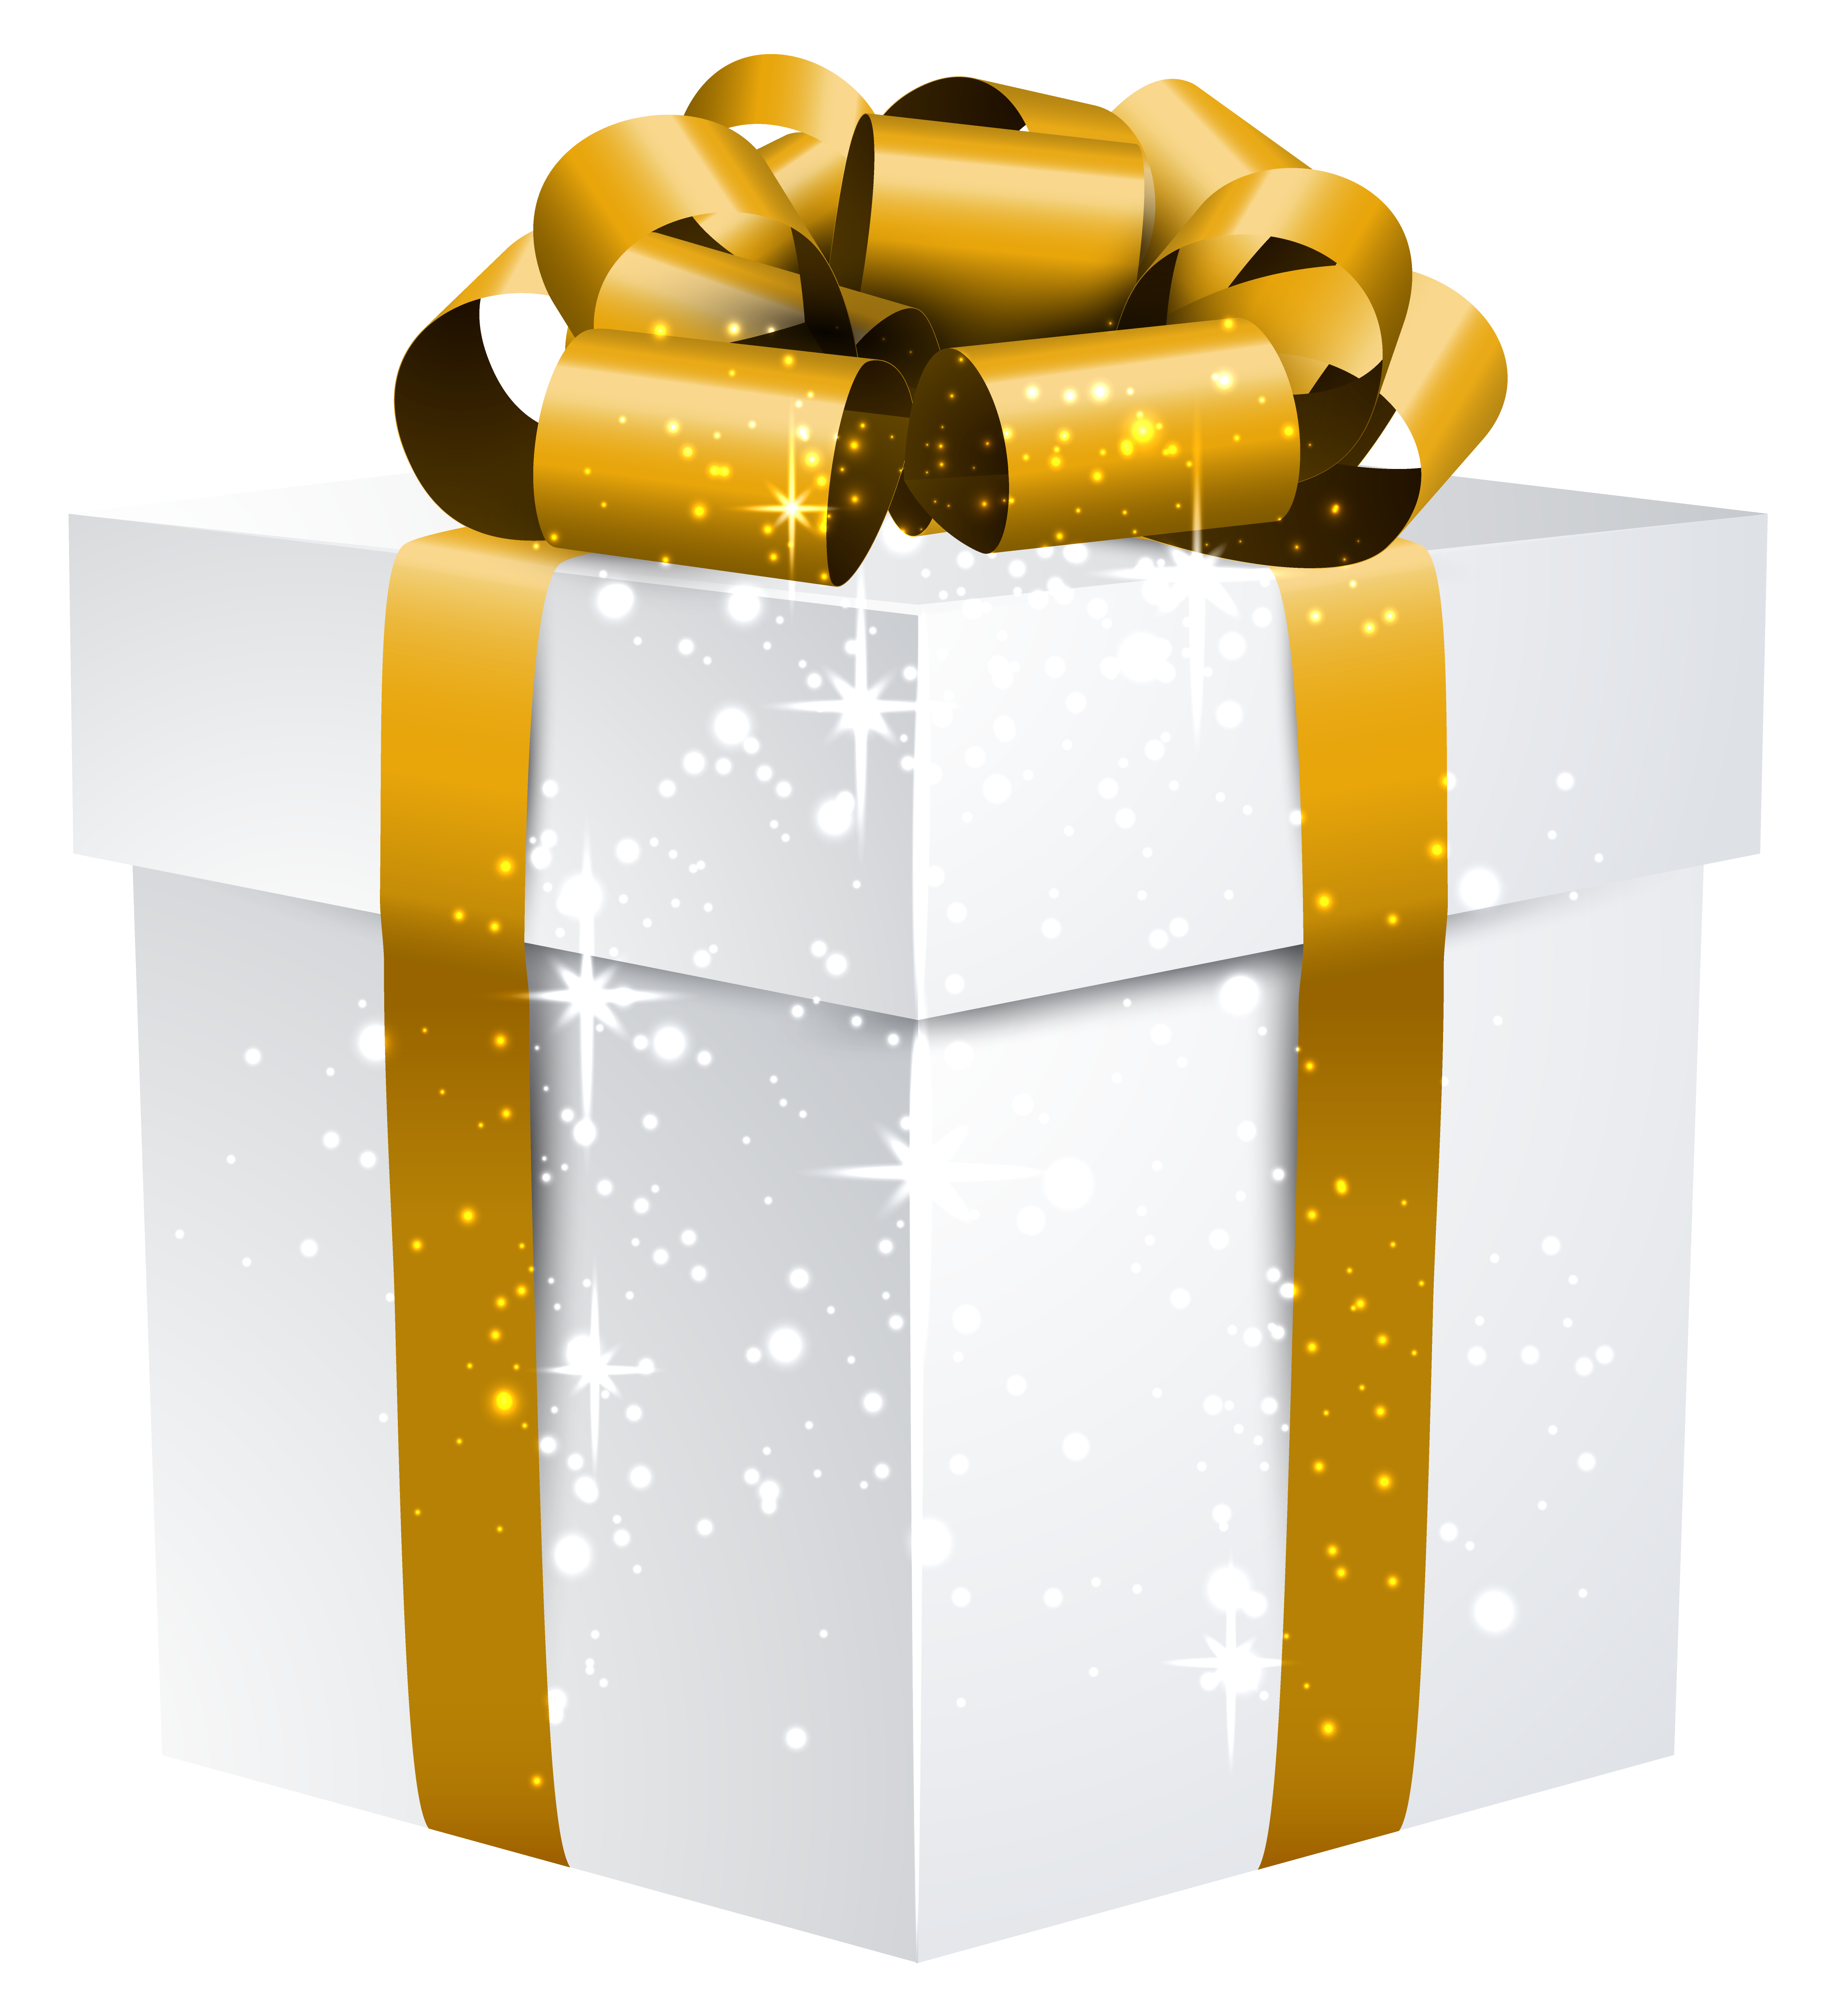 Shining gift box with. White clipart present